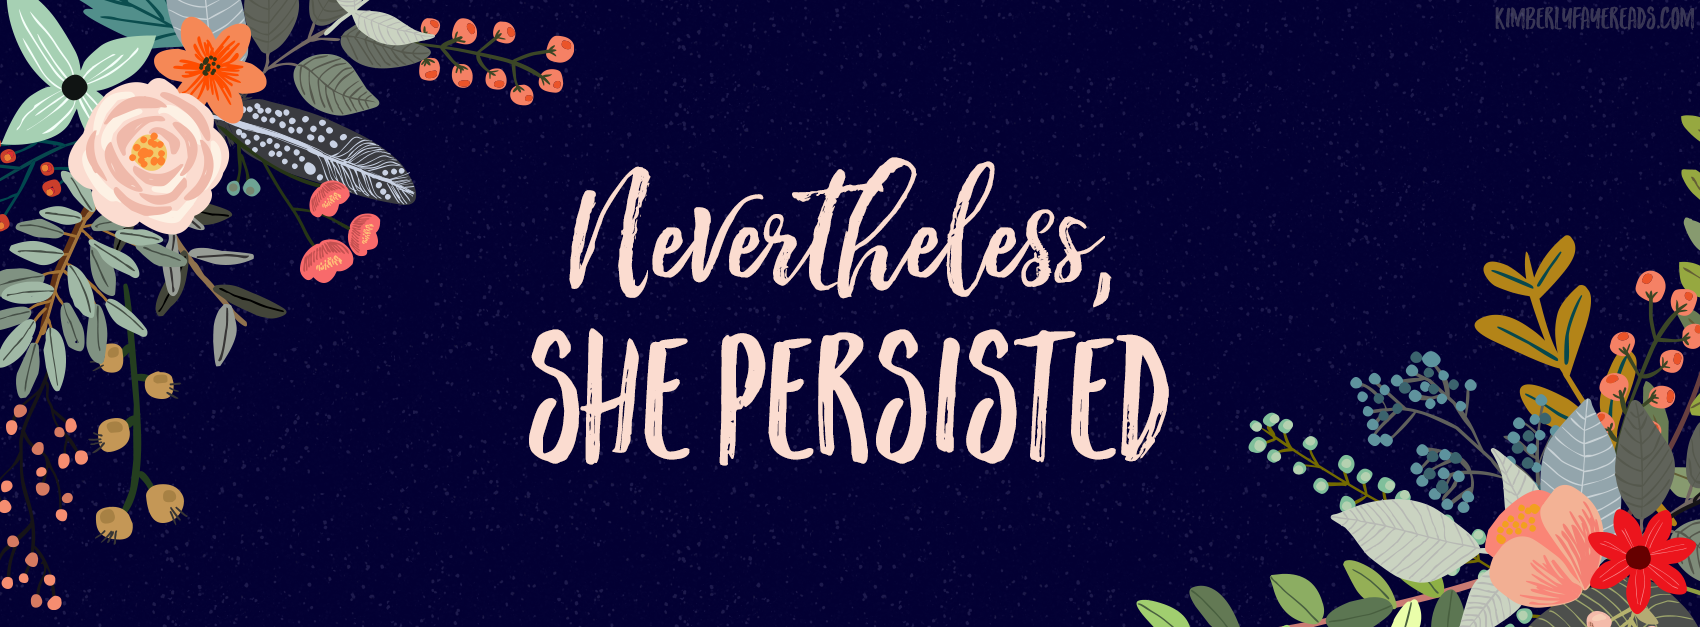 Facebook Cover Photo - Nevertheless She Persisted Cover - HD Wallpaper 